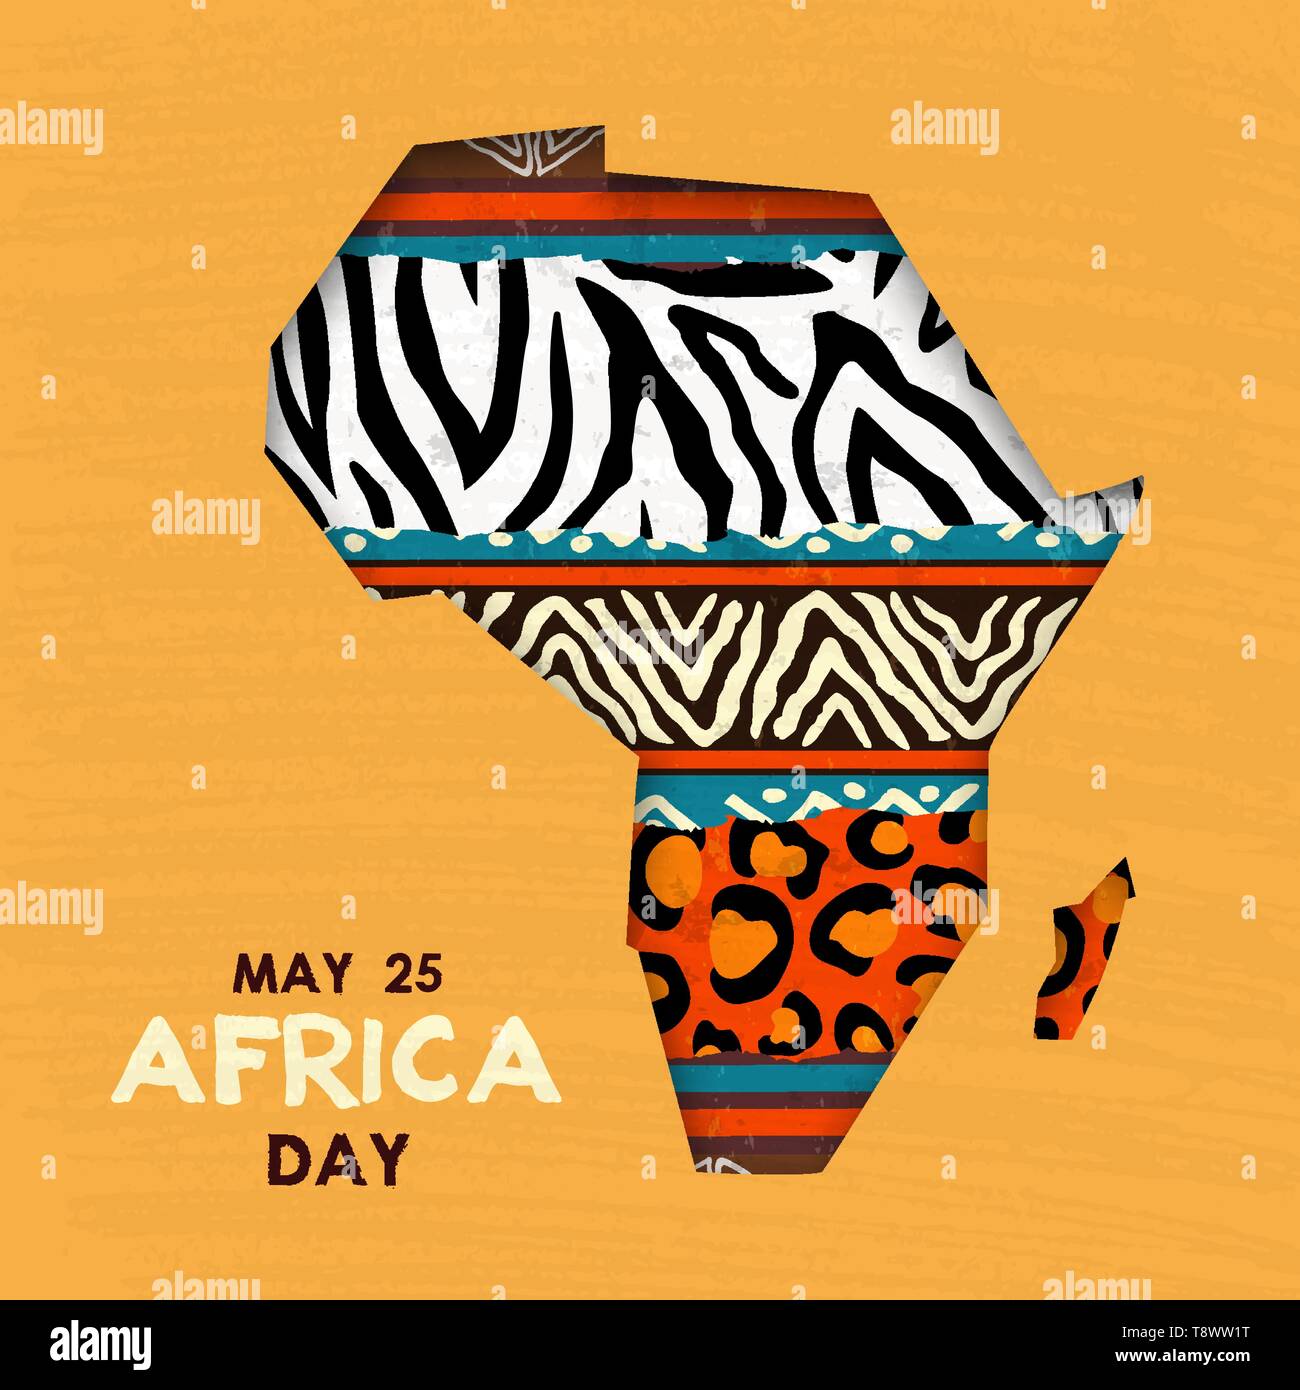 Africa Day greeting card illustration for 25 may celebration. African continent map with ethnic art and wild animal print textures. Stock Vector